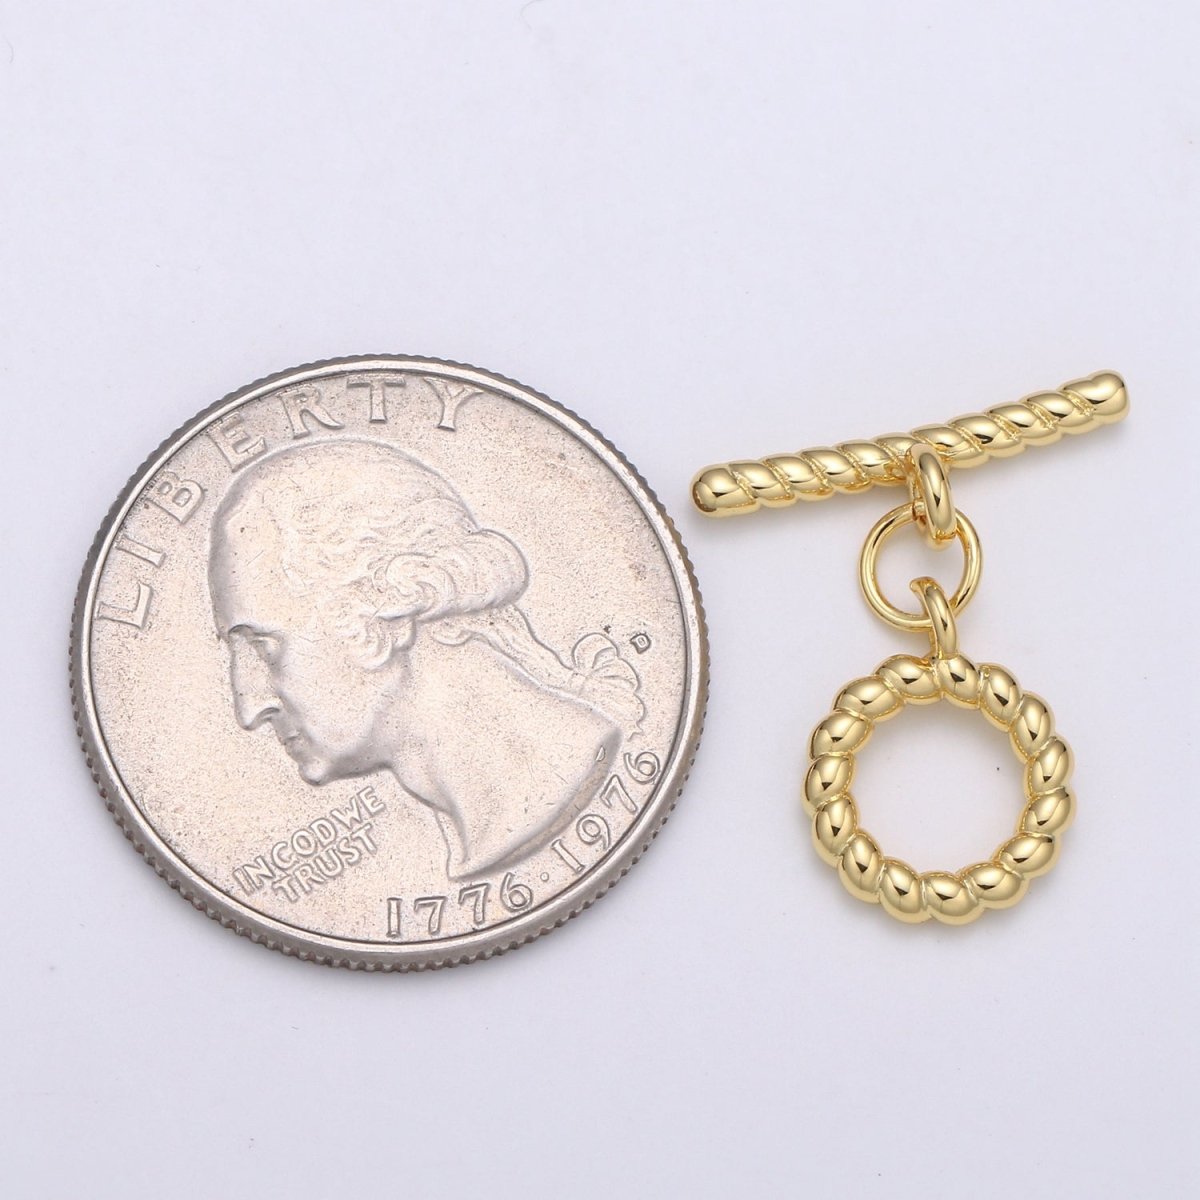 10.6 mm 24K Gold twisted pretzel Toggle Clasp with jump ring-Gold, for necklace, bracelet, DIY Jewelry making L-139 - DLUXCA